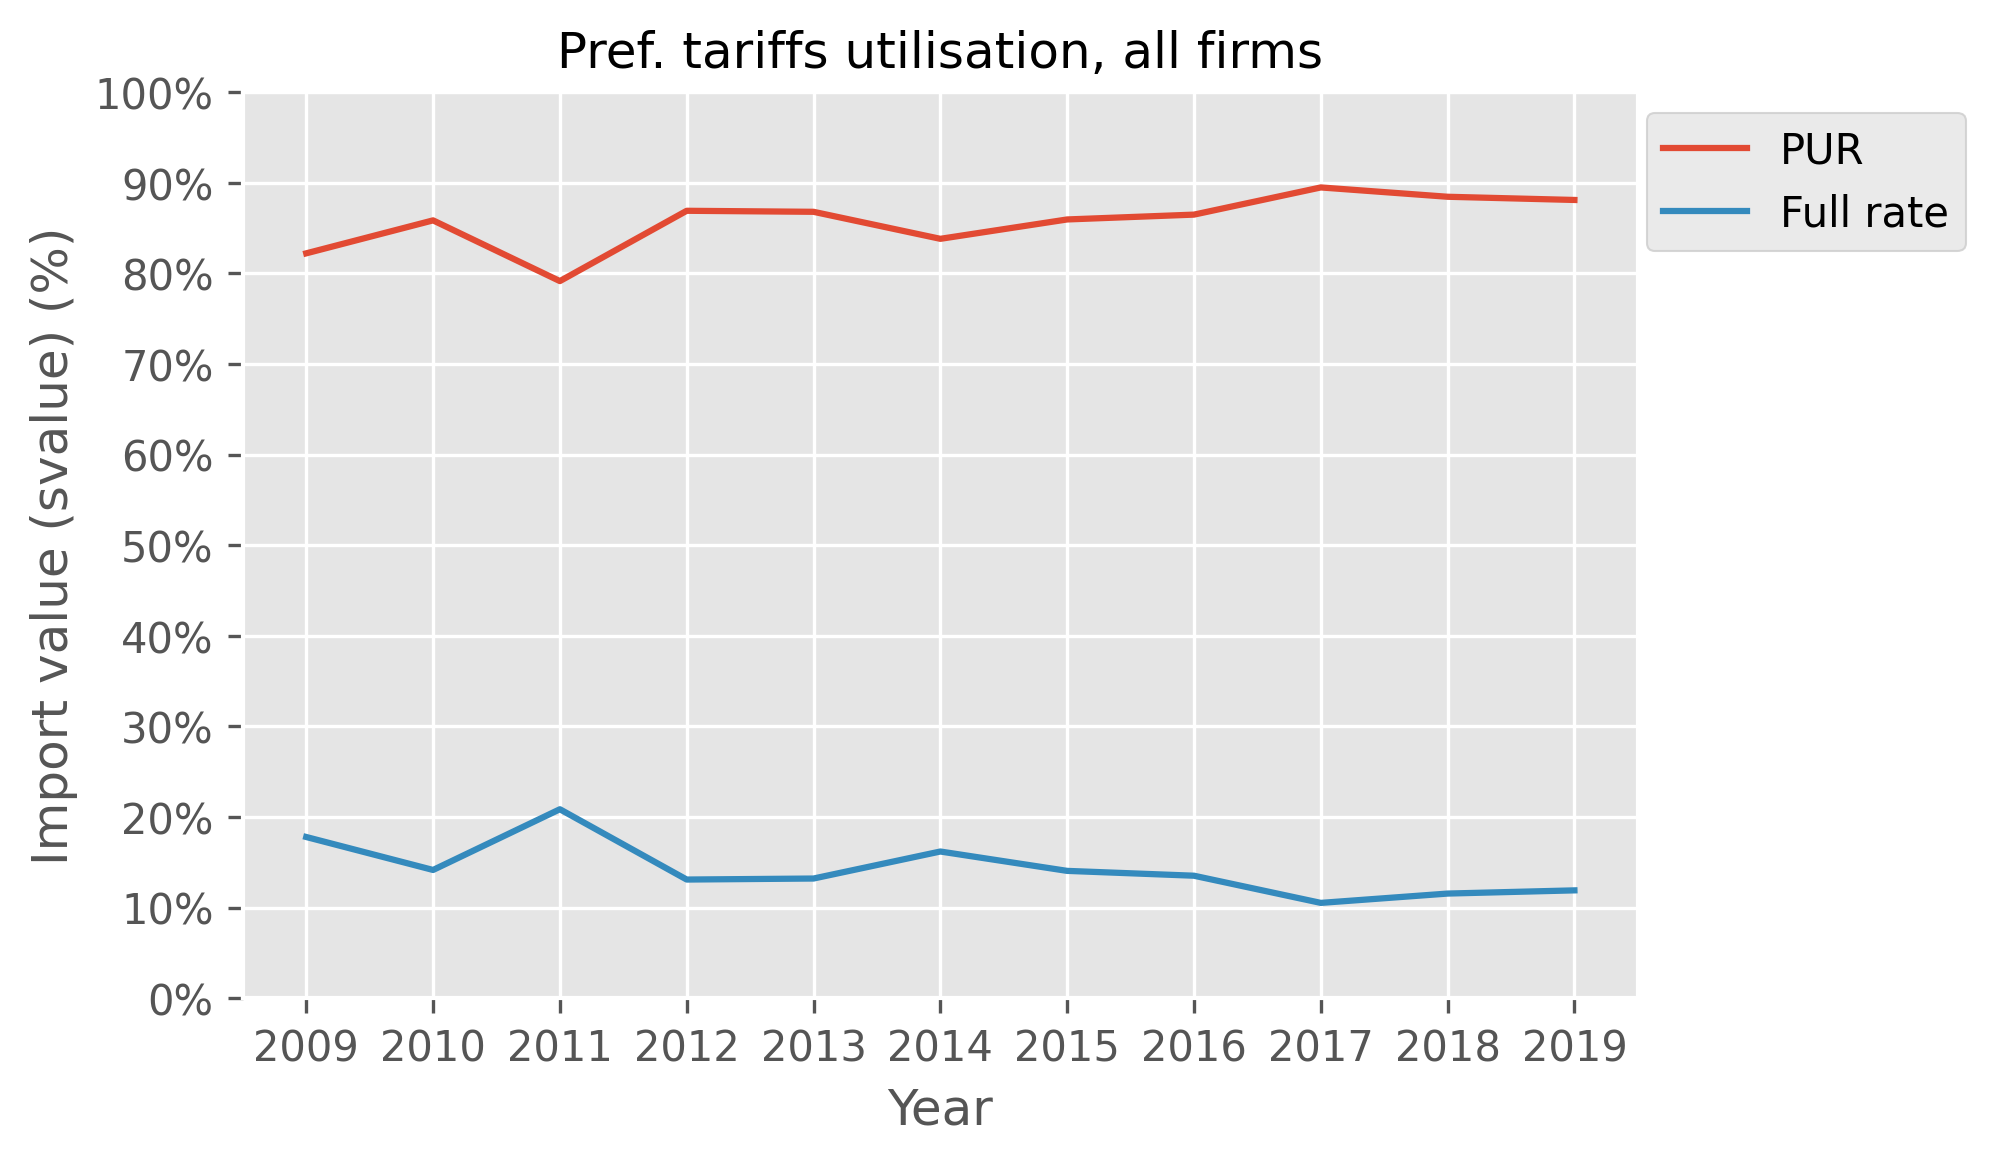 Figure 15: Time series of import transaction value, by tariff type (PURs and Full rate), which shows that the proportion of the value of transactions which utilise preferential tariffs remains at a high level, with an average of 86% over the years.